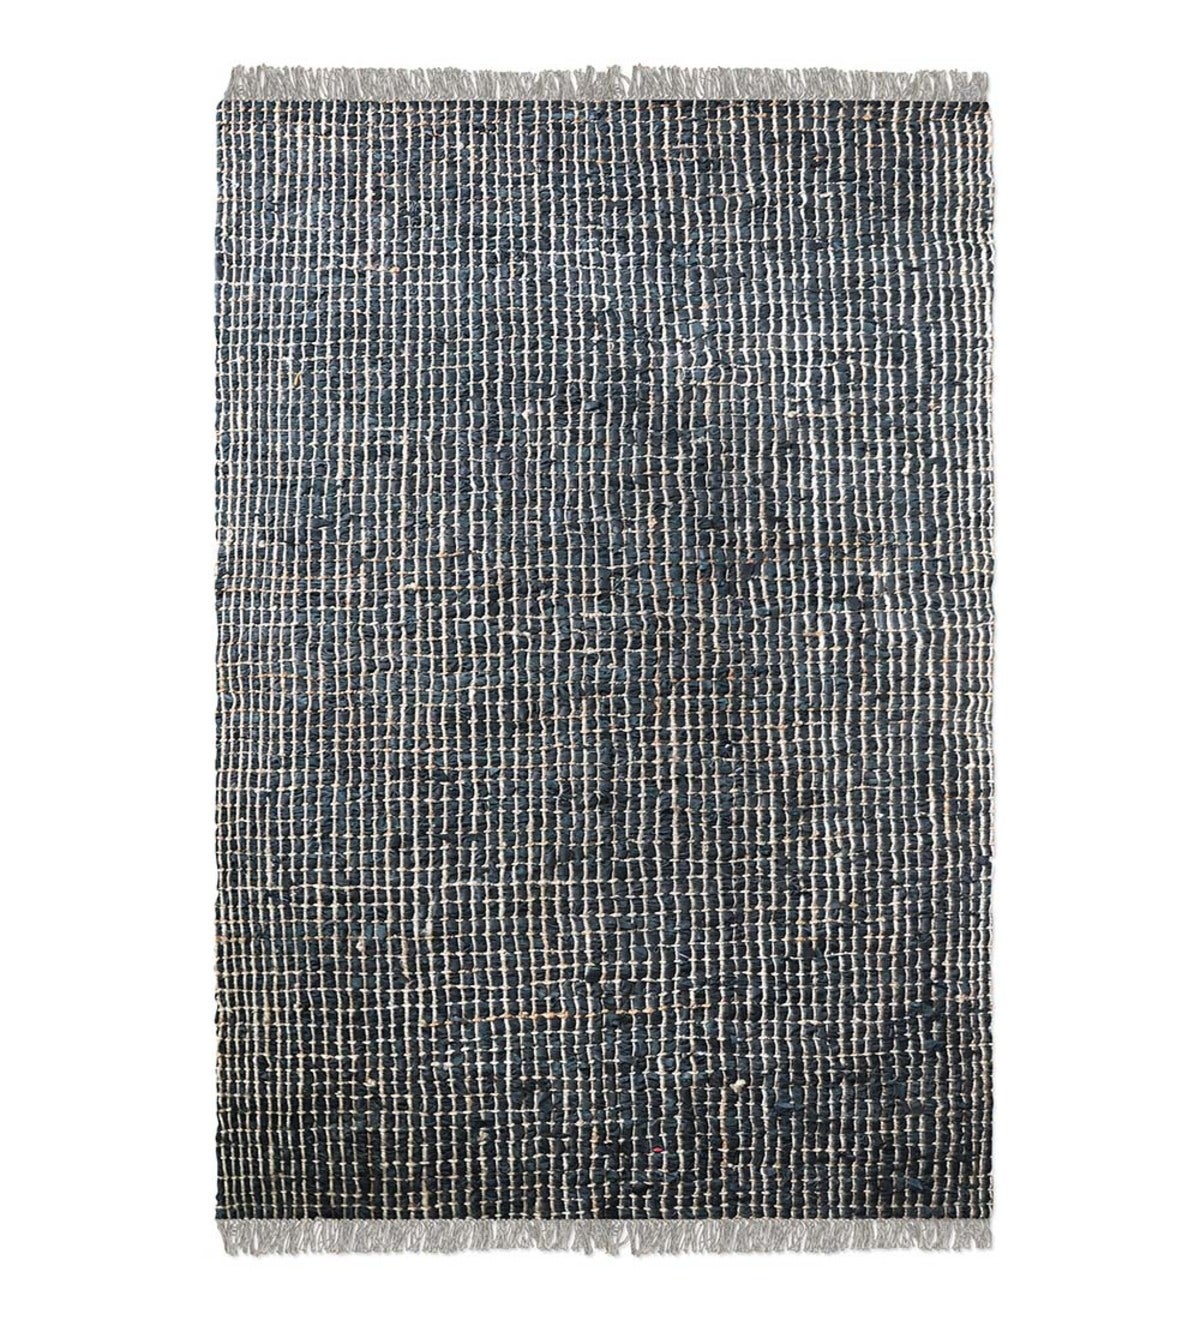 Braymer Recycled Leather and Natural Hemp Rug